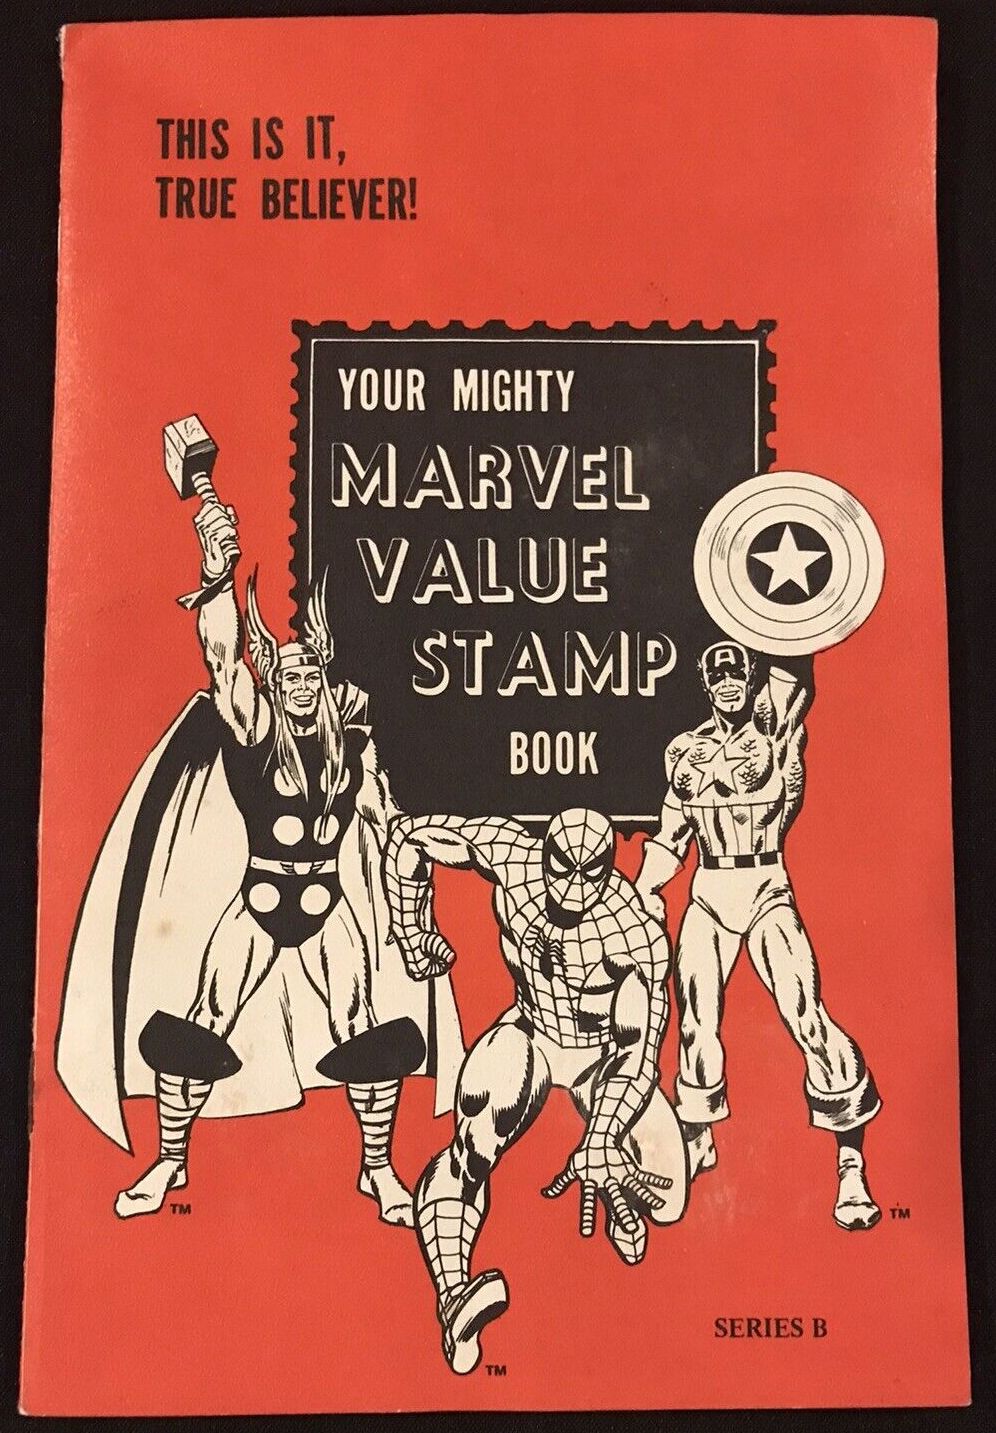 Classic MARVEL VALUE STAMPS to Be ReReleased as a PageADay Calendar